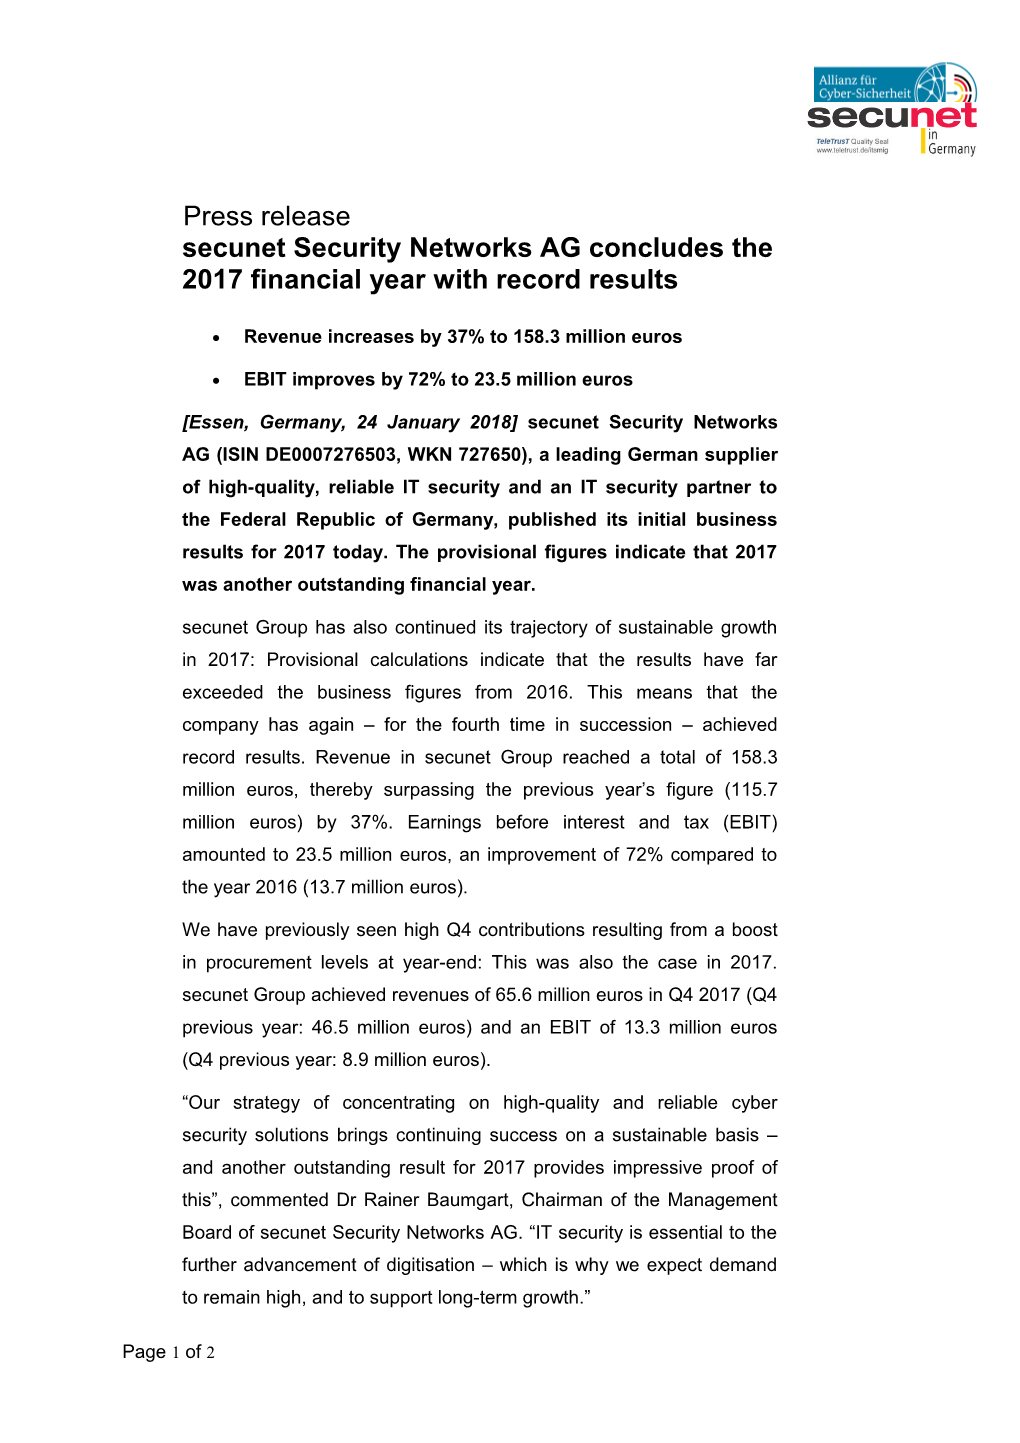 Secunet Security Networks AG Concludes the 2017 Financial Year with Record Results